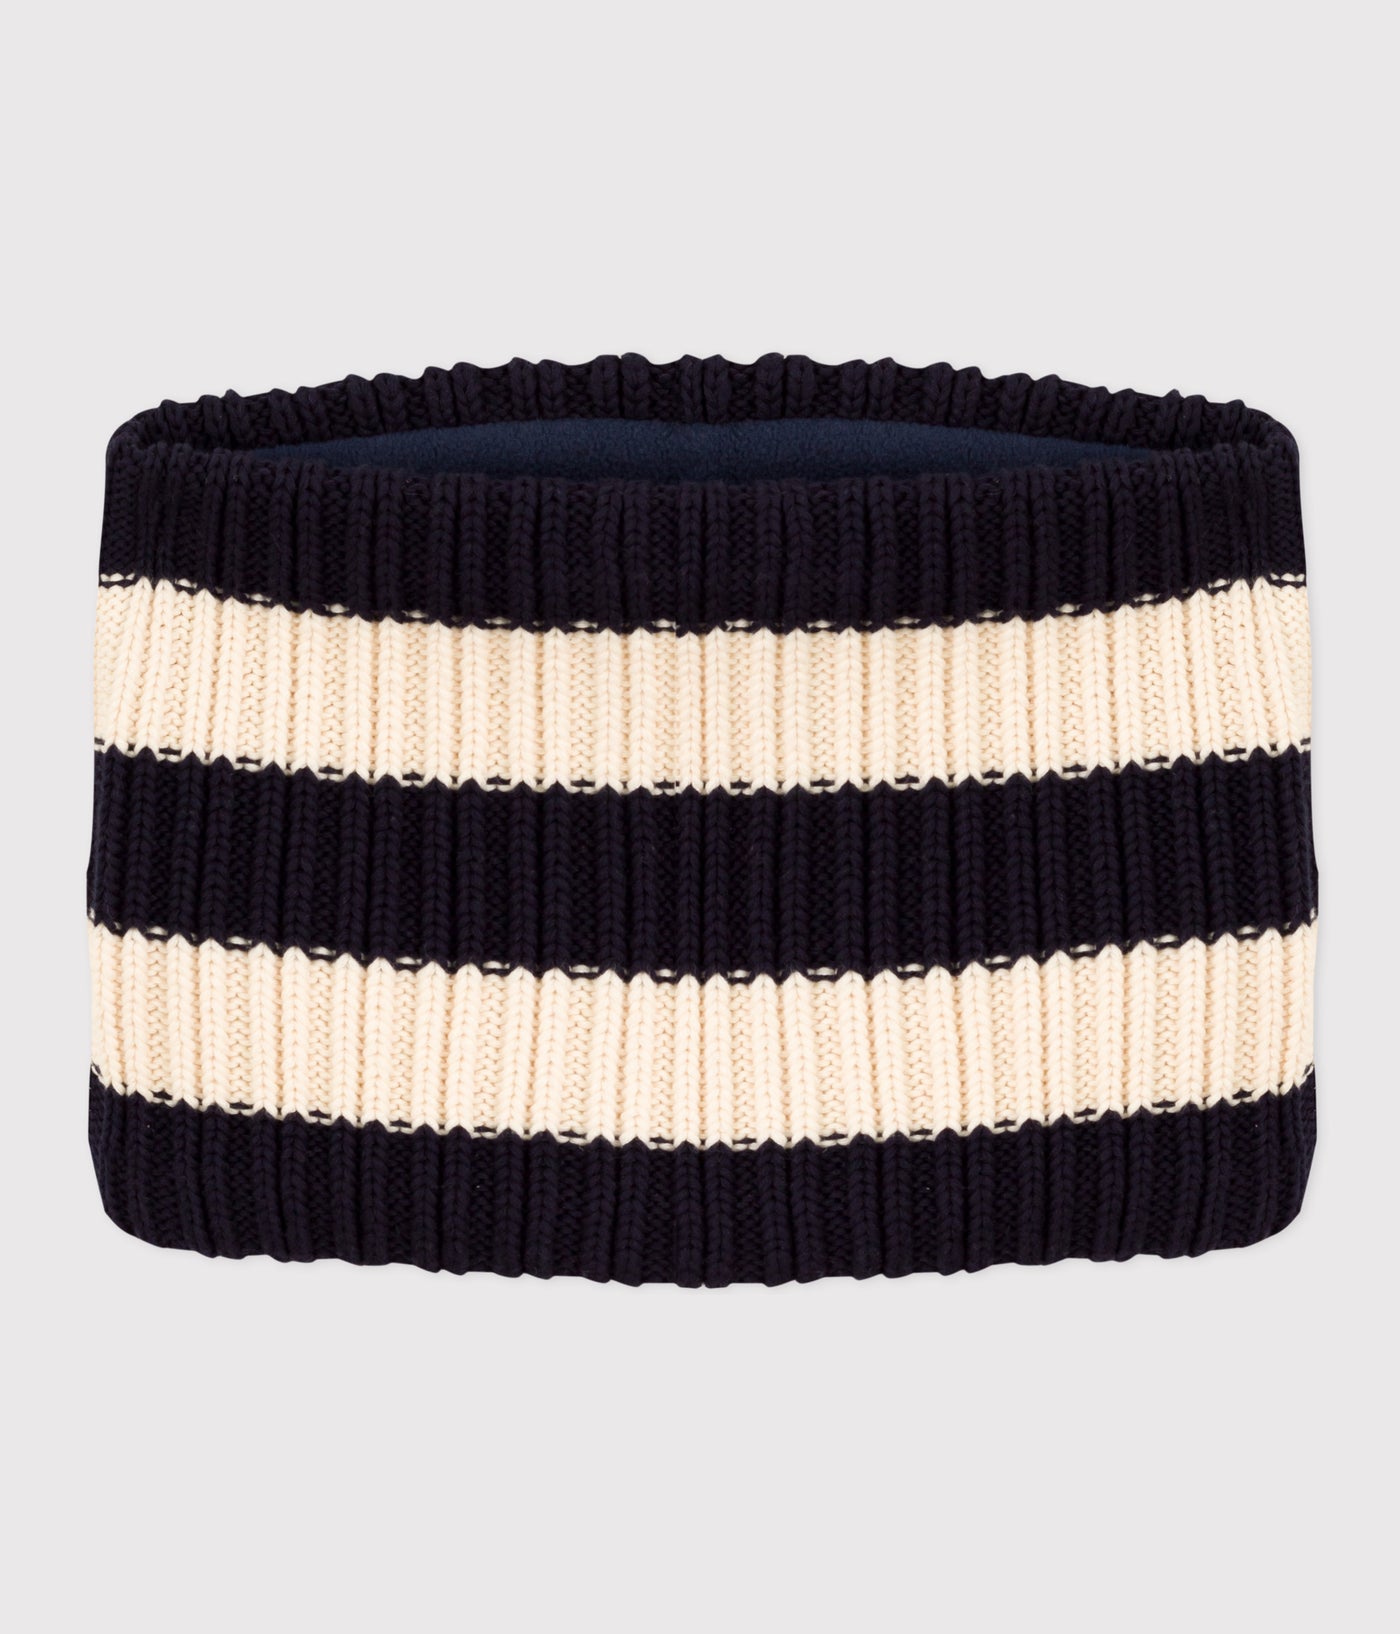 UNISEX FLEECE-LINED STRIPY KNITTED SNOOD